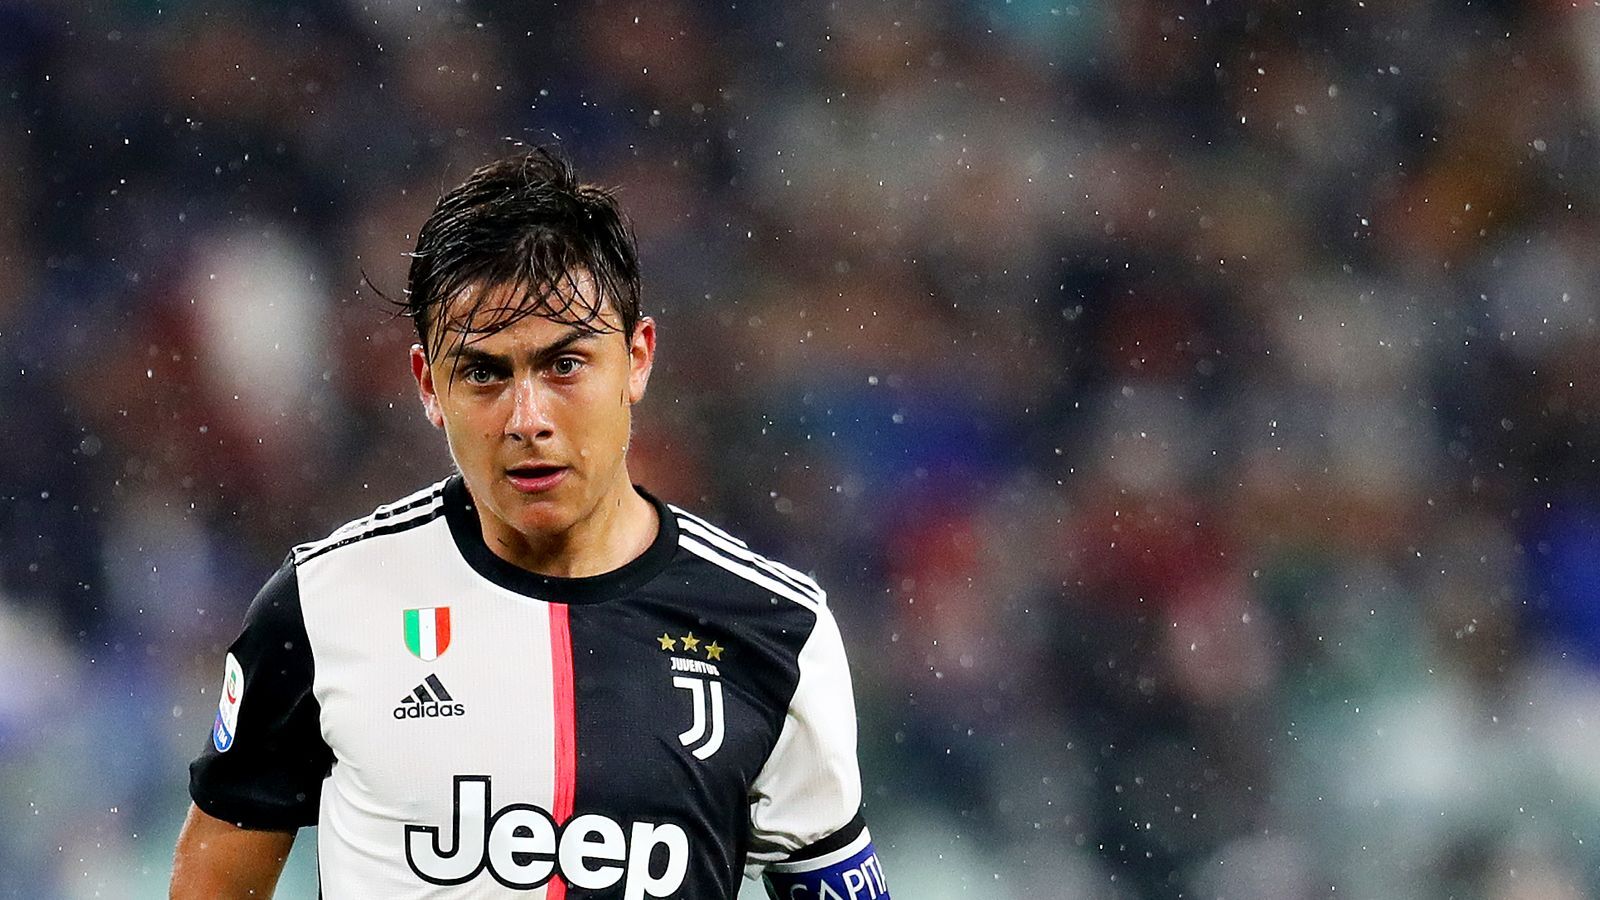 Dybala Says He Would Love to Play with Messi at Barcelona